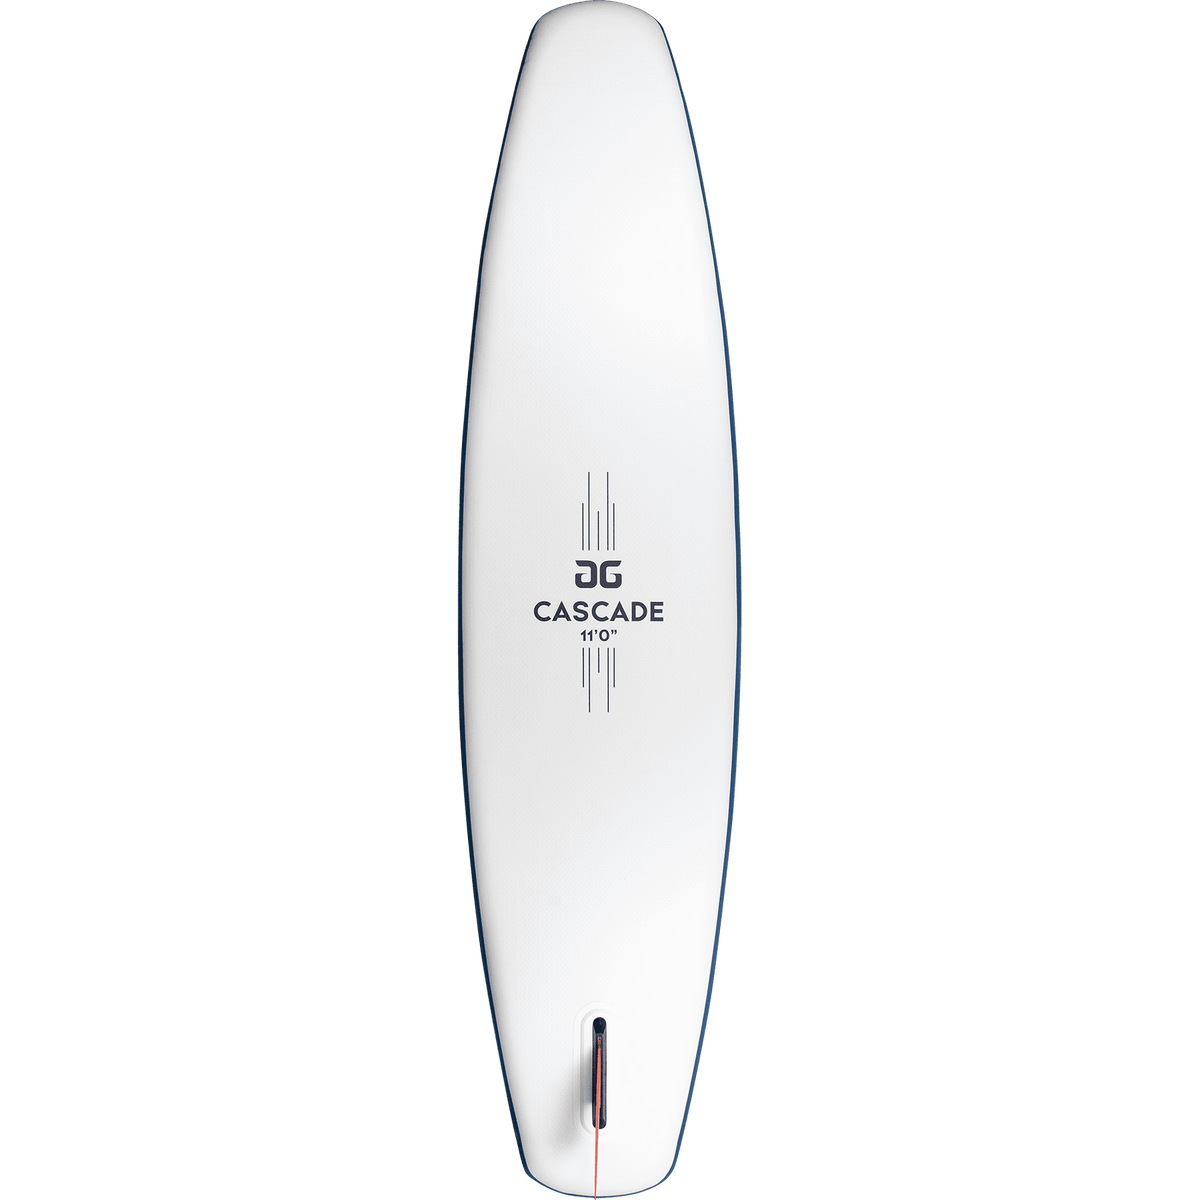 Aquaglide Cascade 11’ Stand Up Paddleboard Package